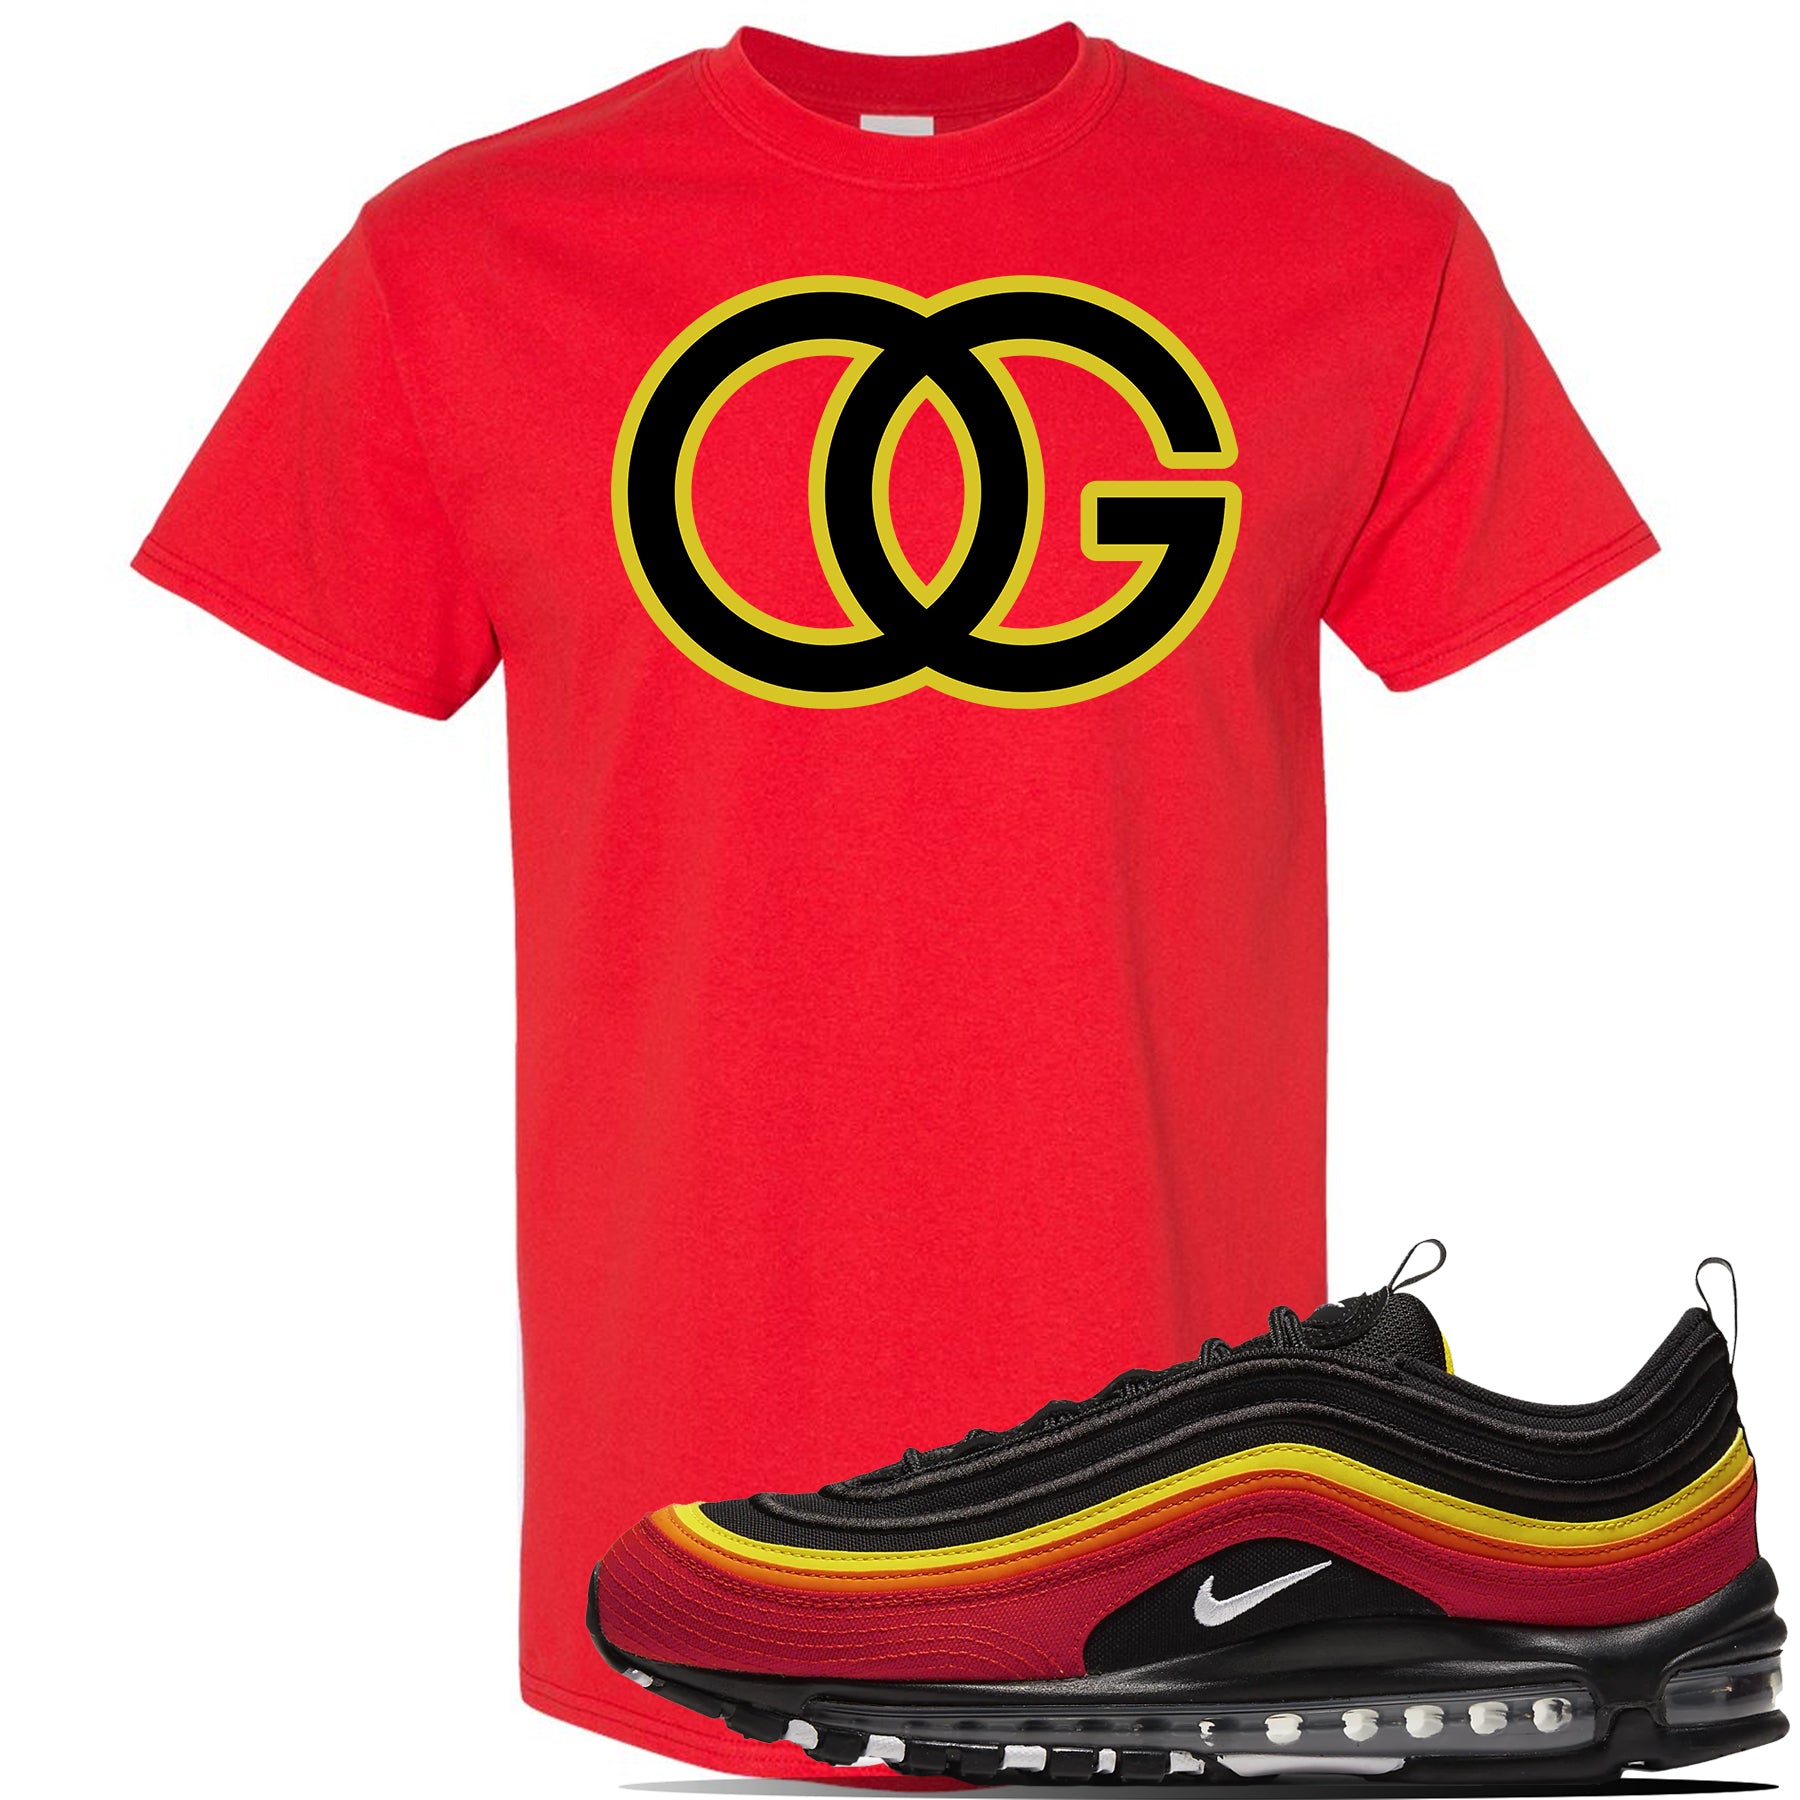 red black and gold nike shirt